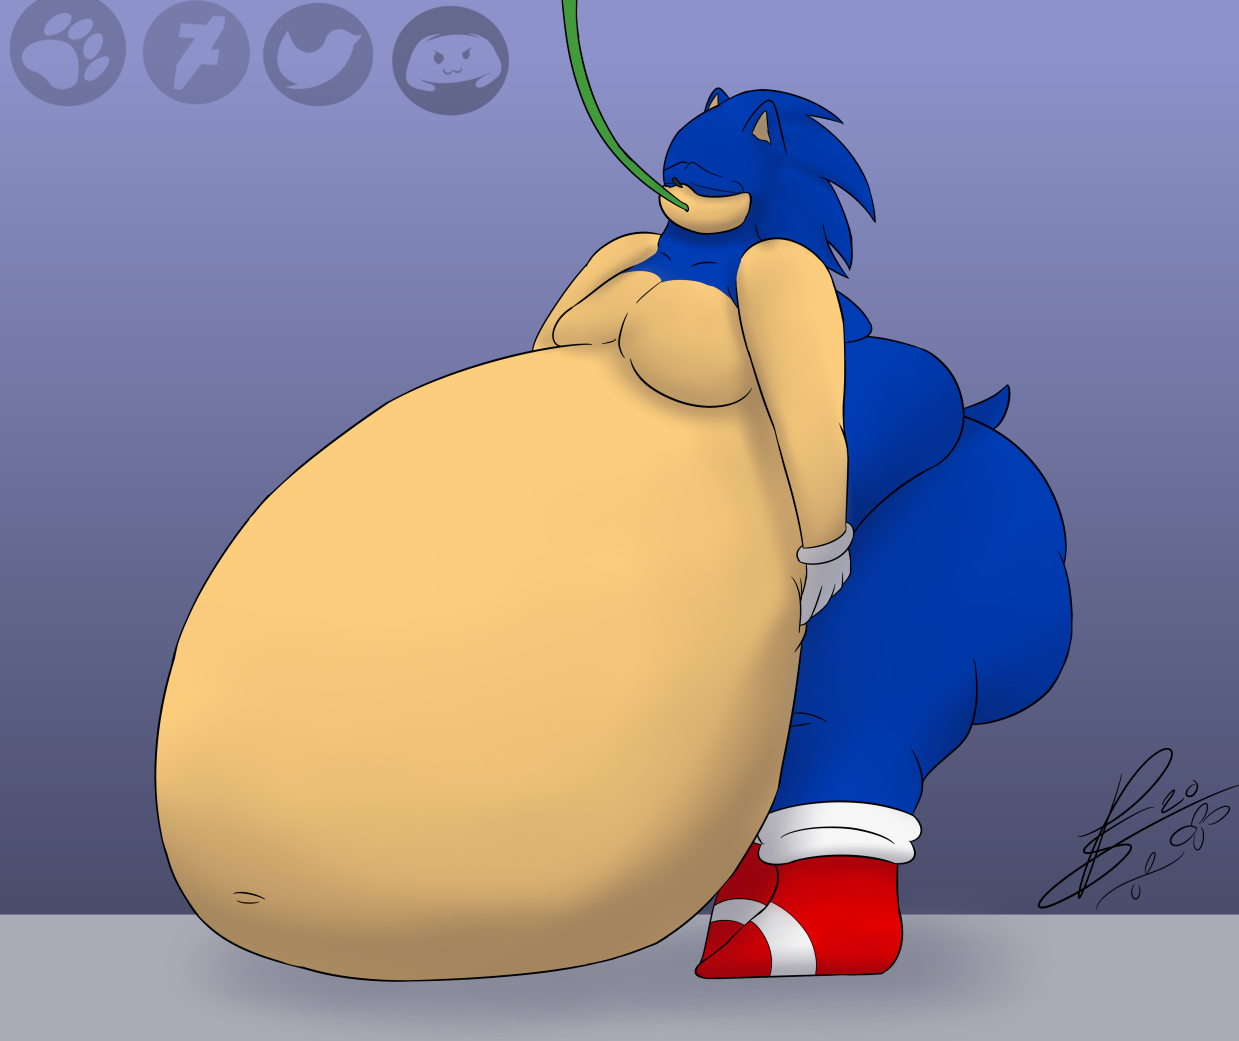 Sonic rule 34 inflation